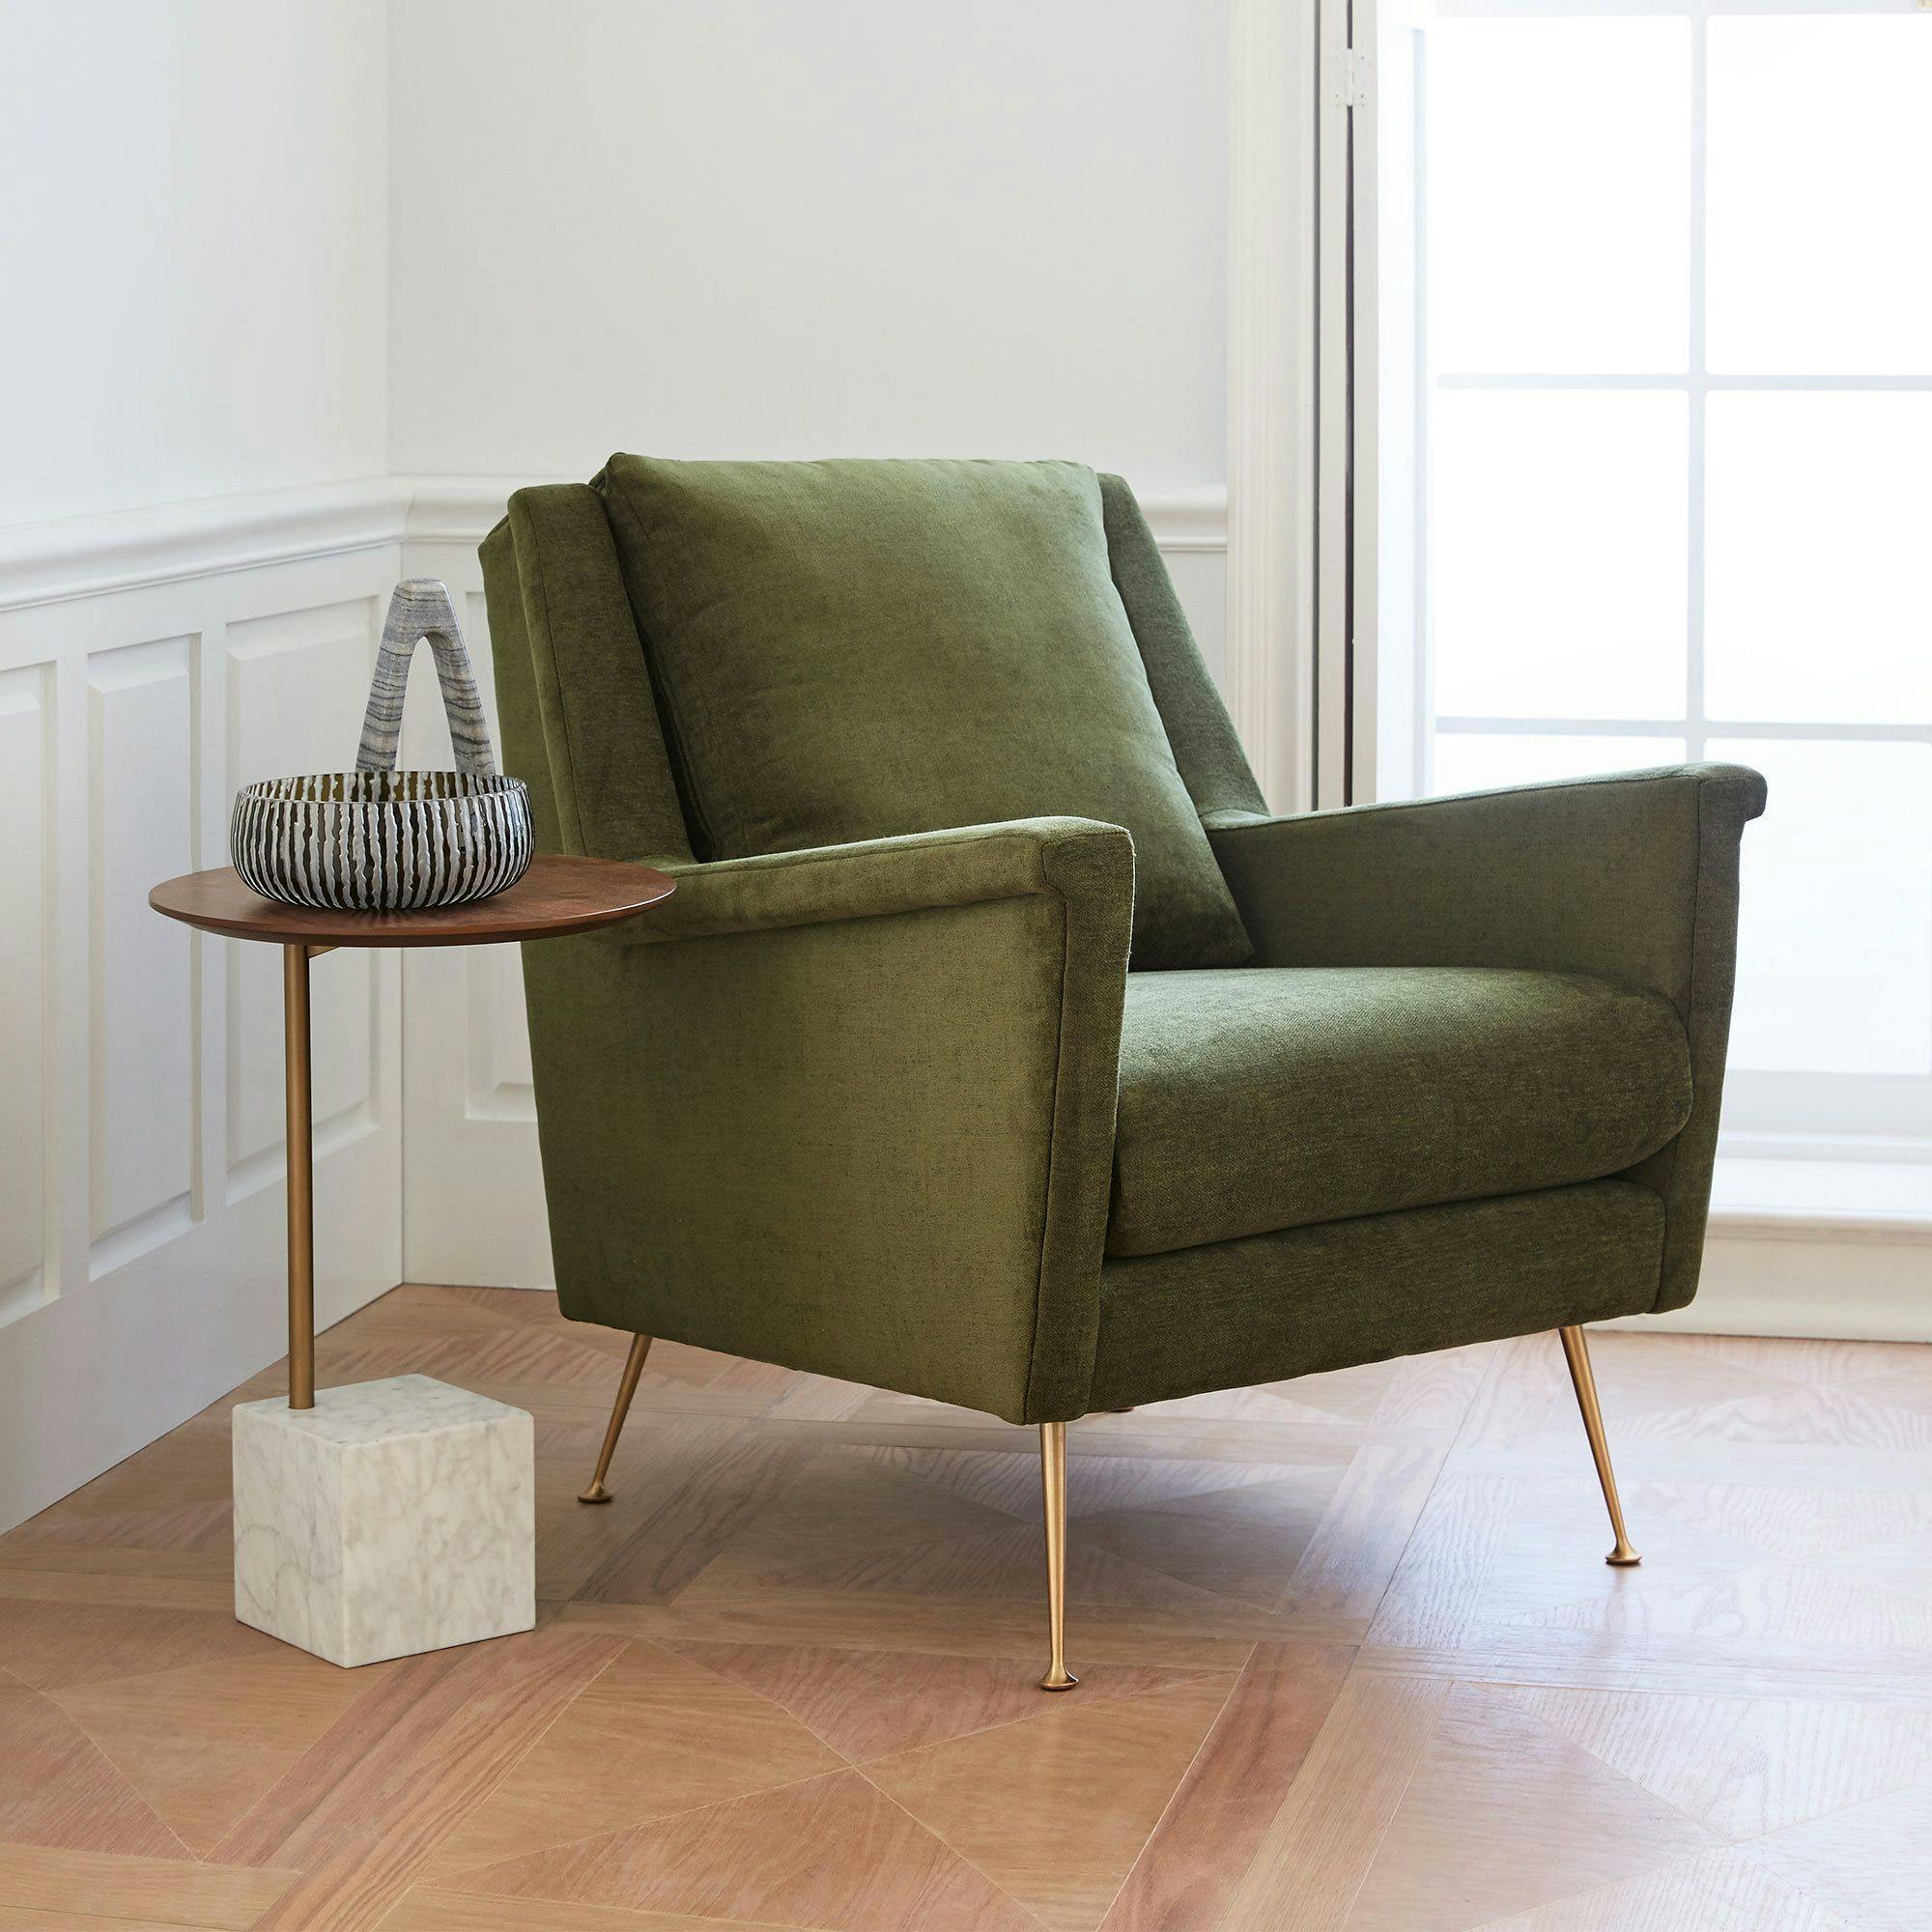 The Carlo Mid-Century Chair from West Elm